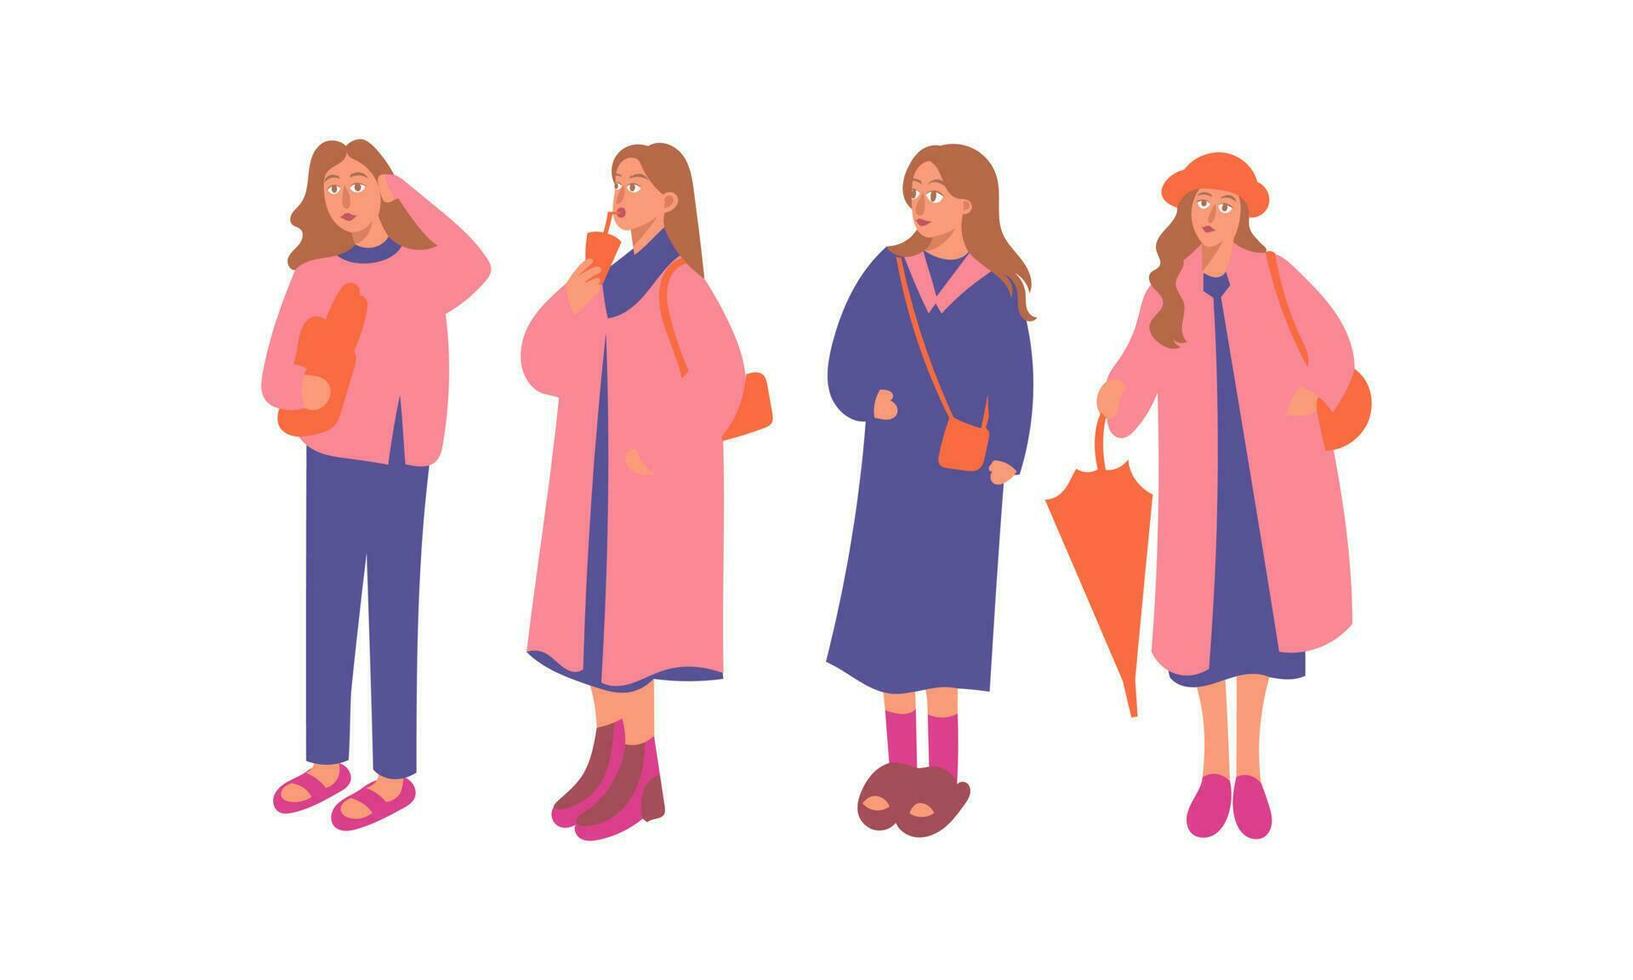 Women in winter clothes. Cartoon style. Set of vector illustrations.